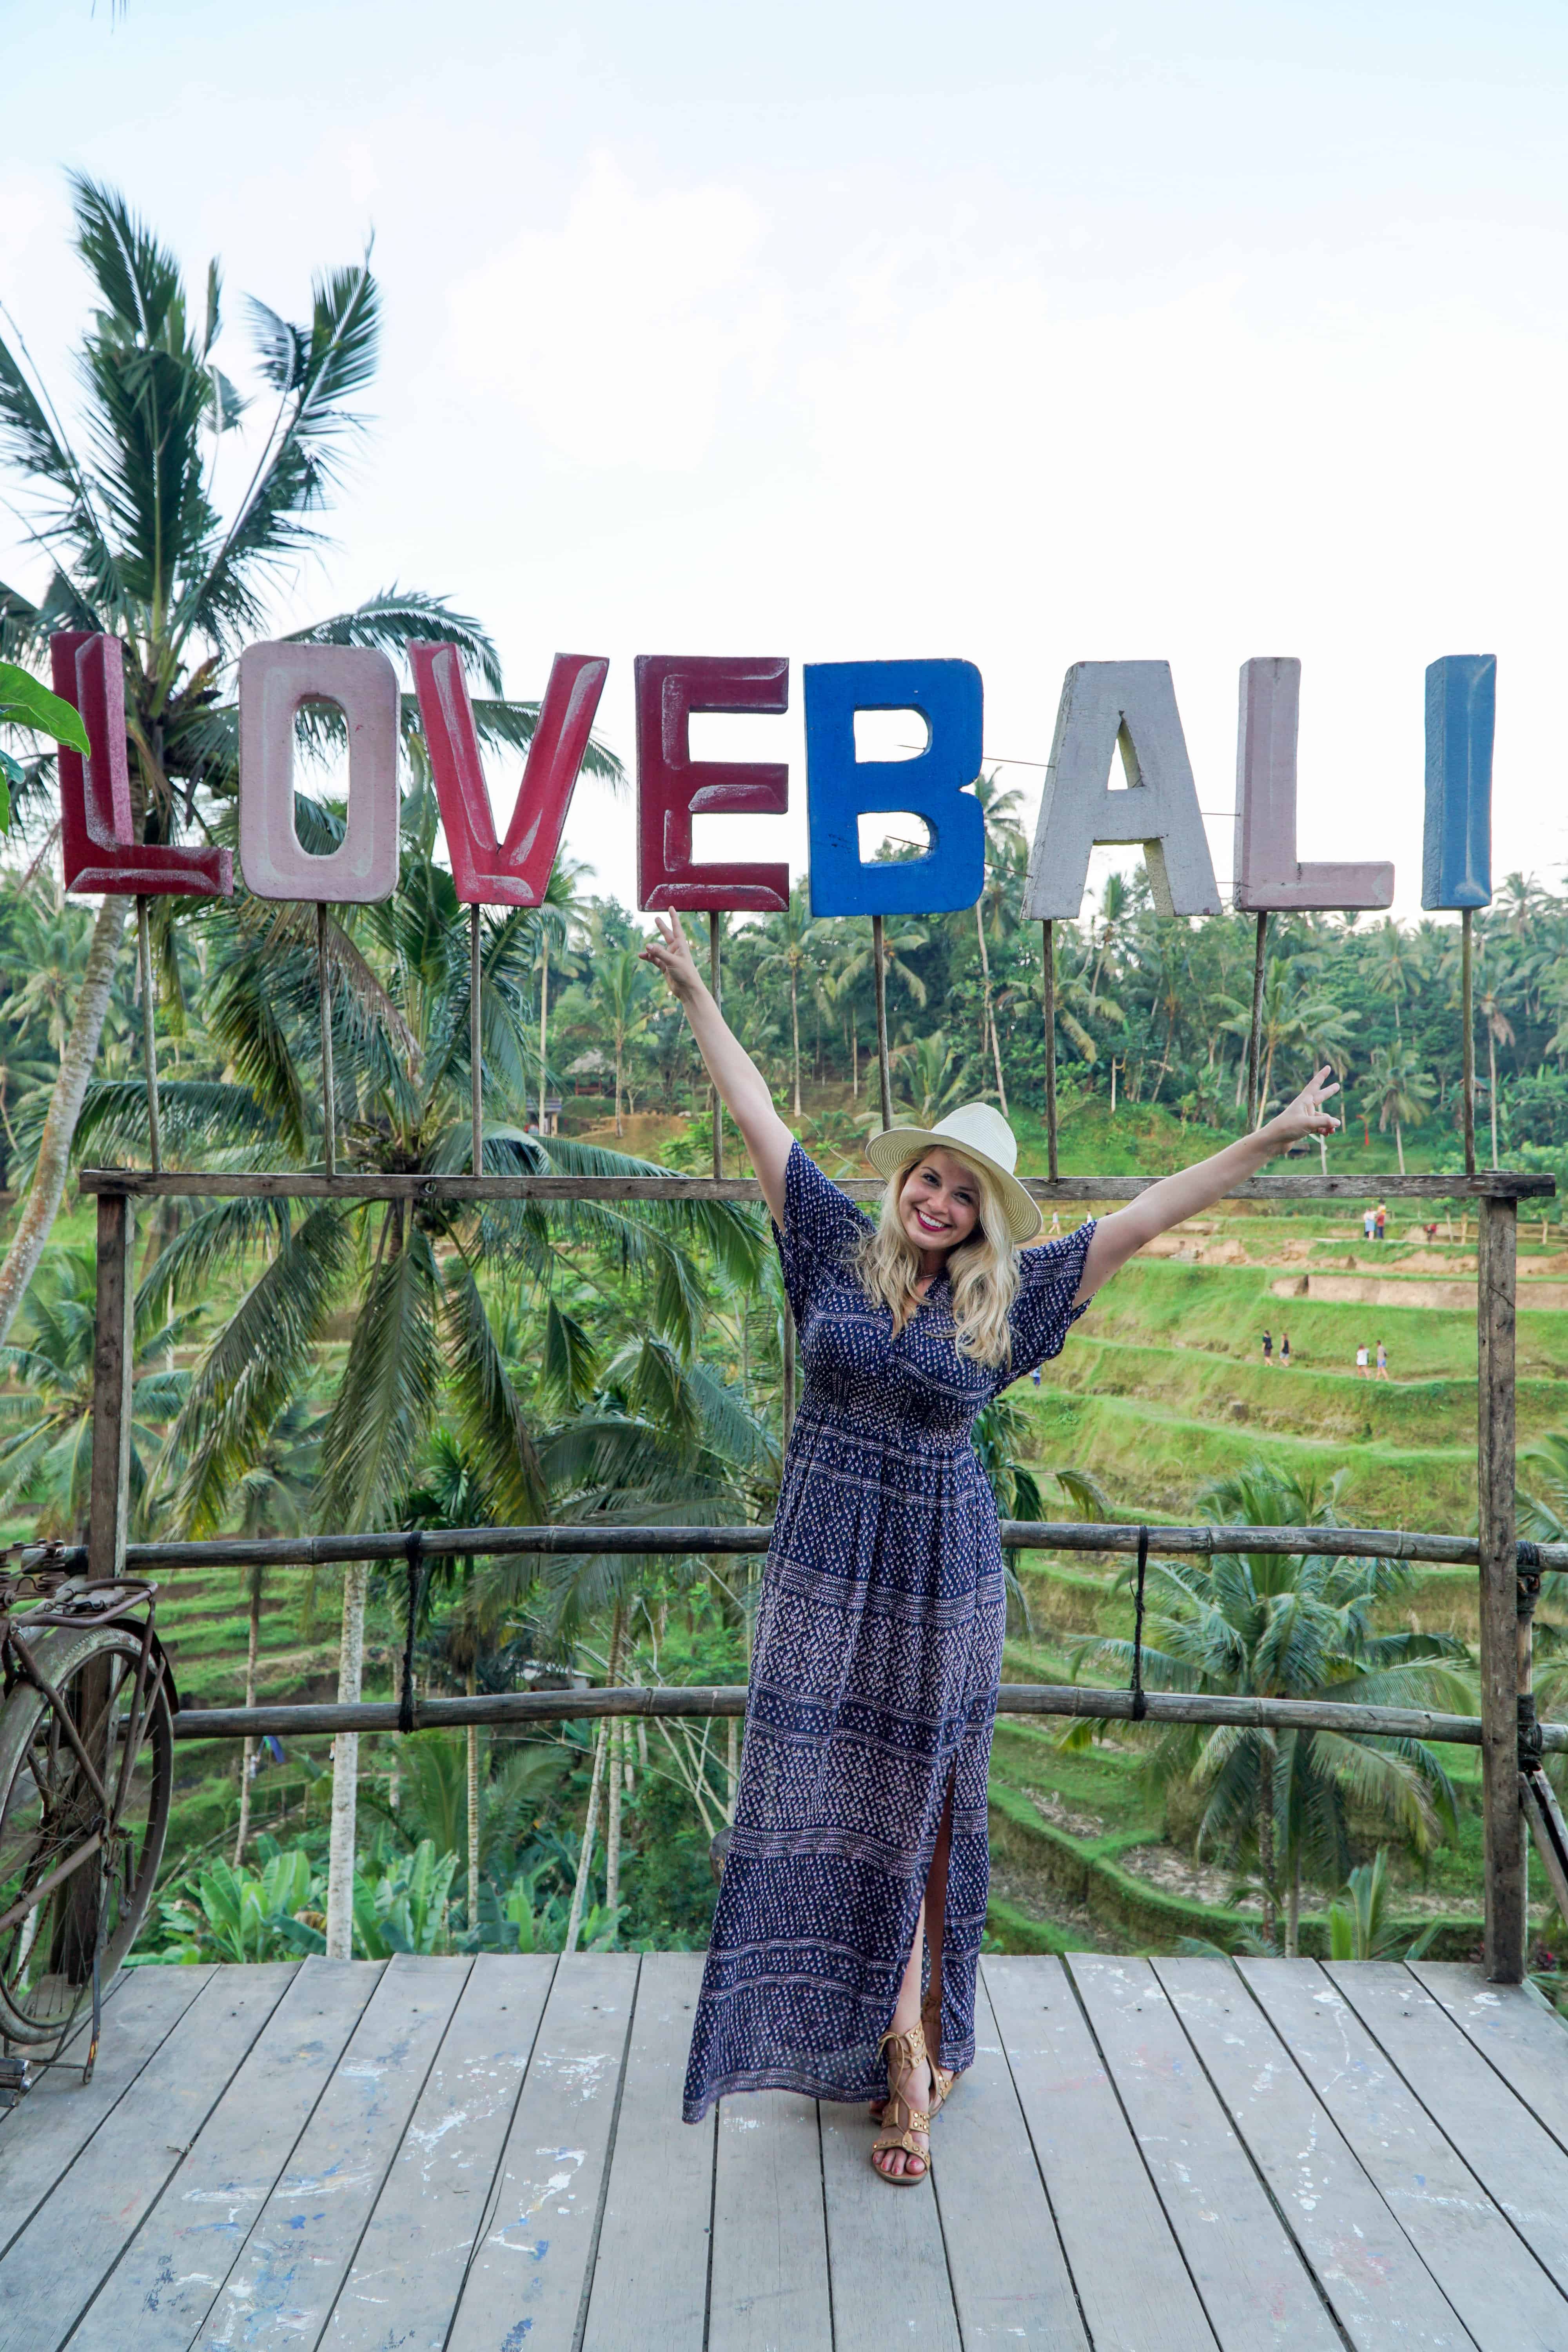 Top 10 Things To Do in Ubud, Bali | The Republic of Rose